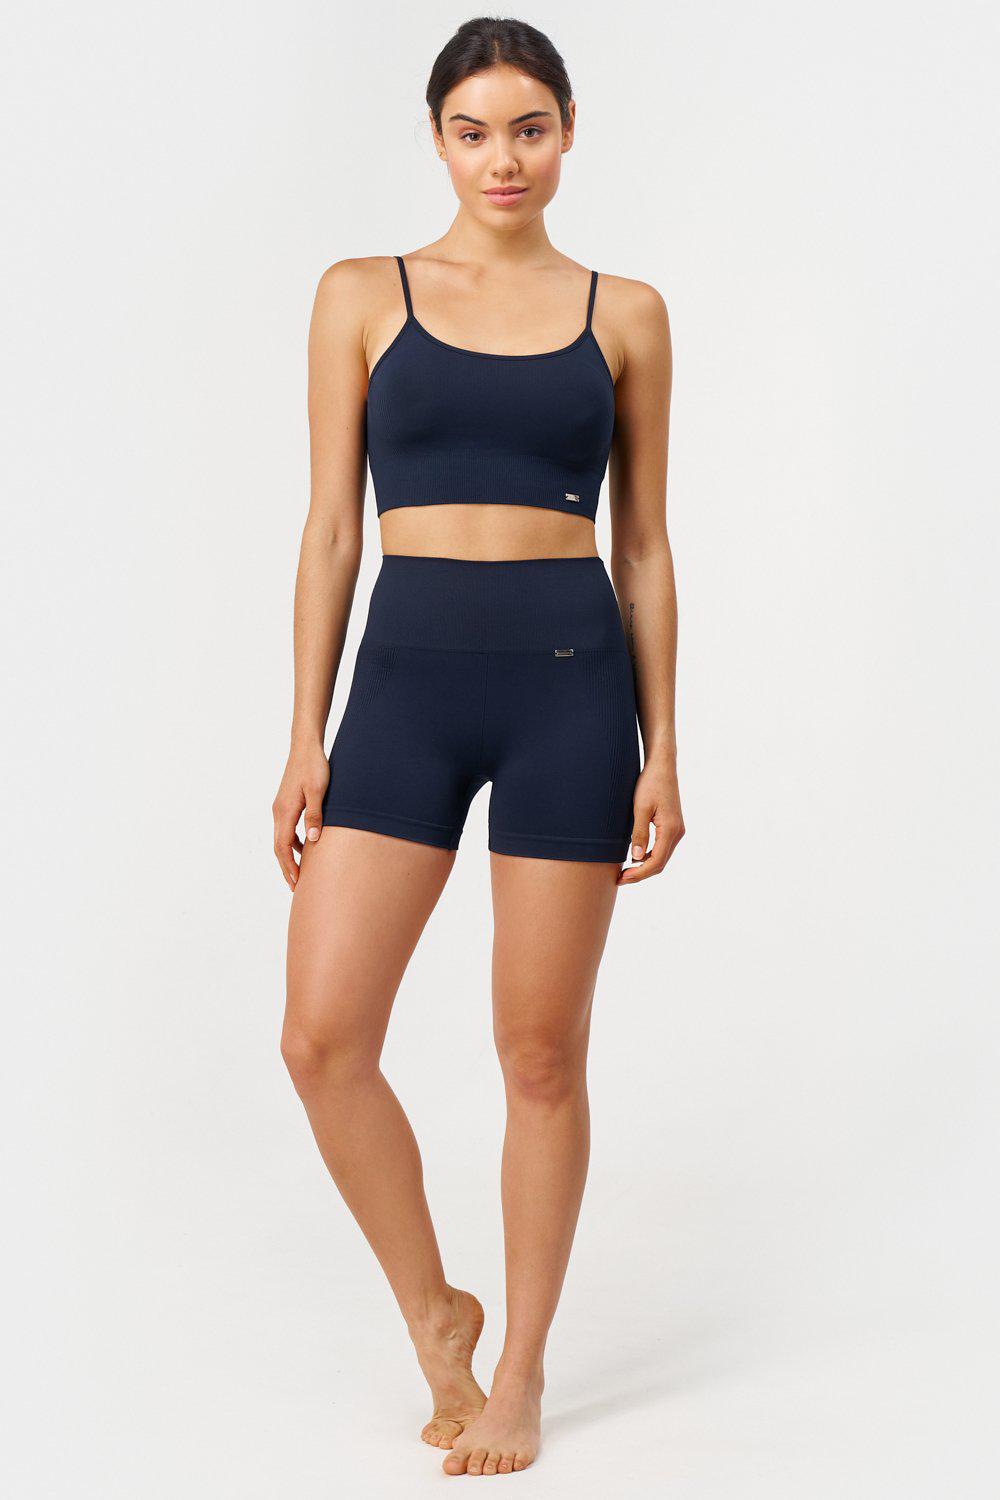 Bliss Short Push-Up en Navy-Shorts-Tienda Ropa Leggings Yoga Sostenibles Reciclados Mujer On-line Barcelona Believe Athletics Sustainable Recycled Yoga Clothes